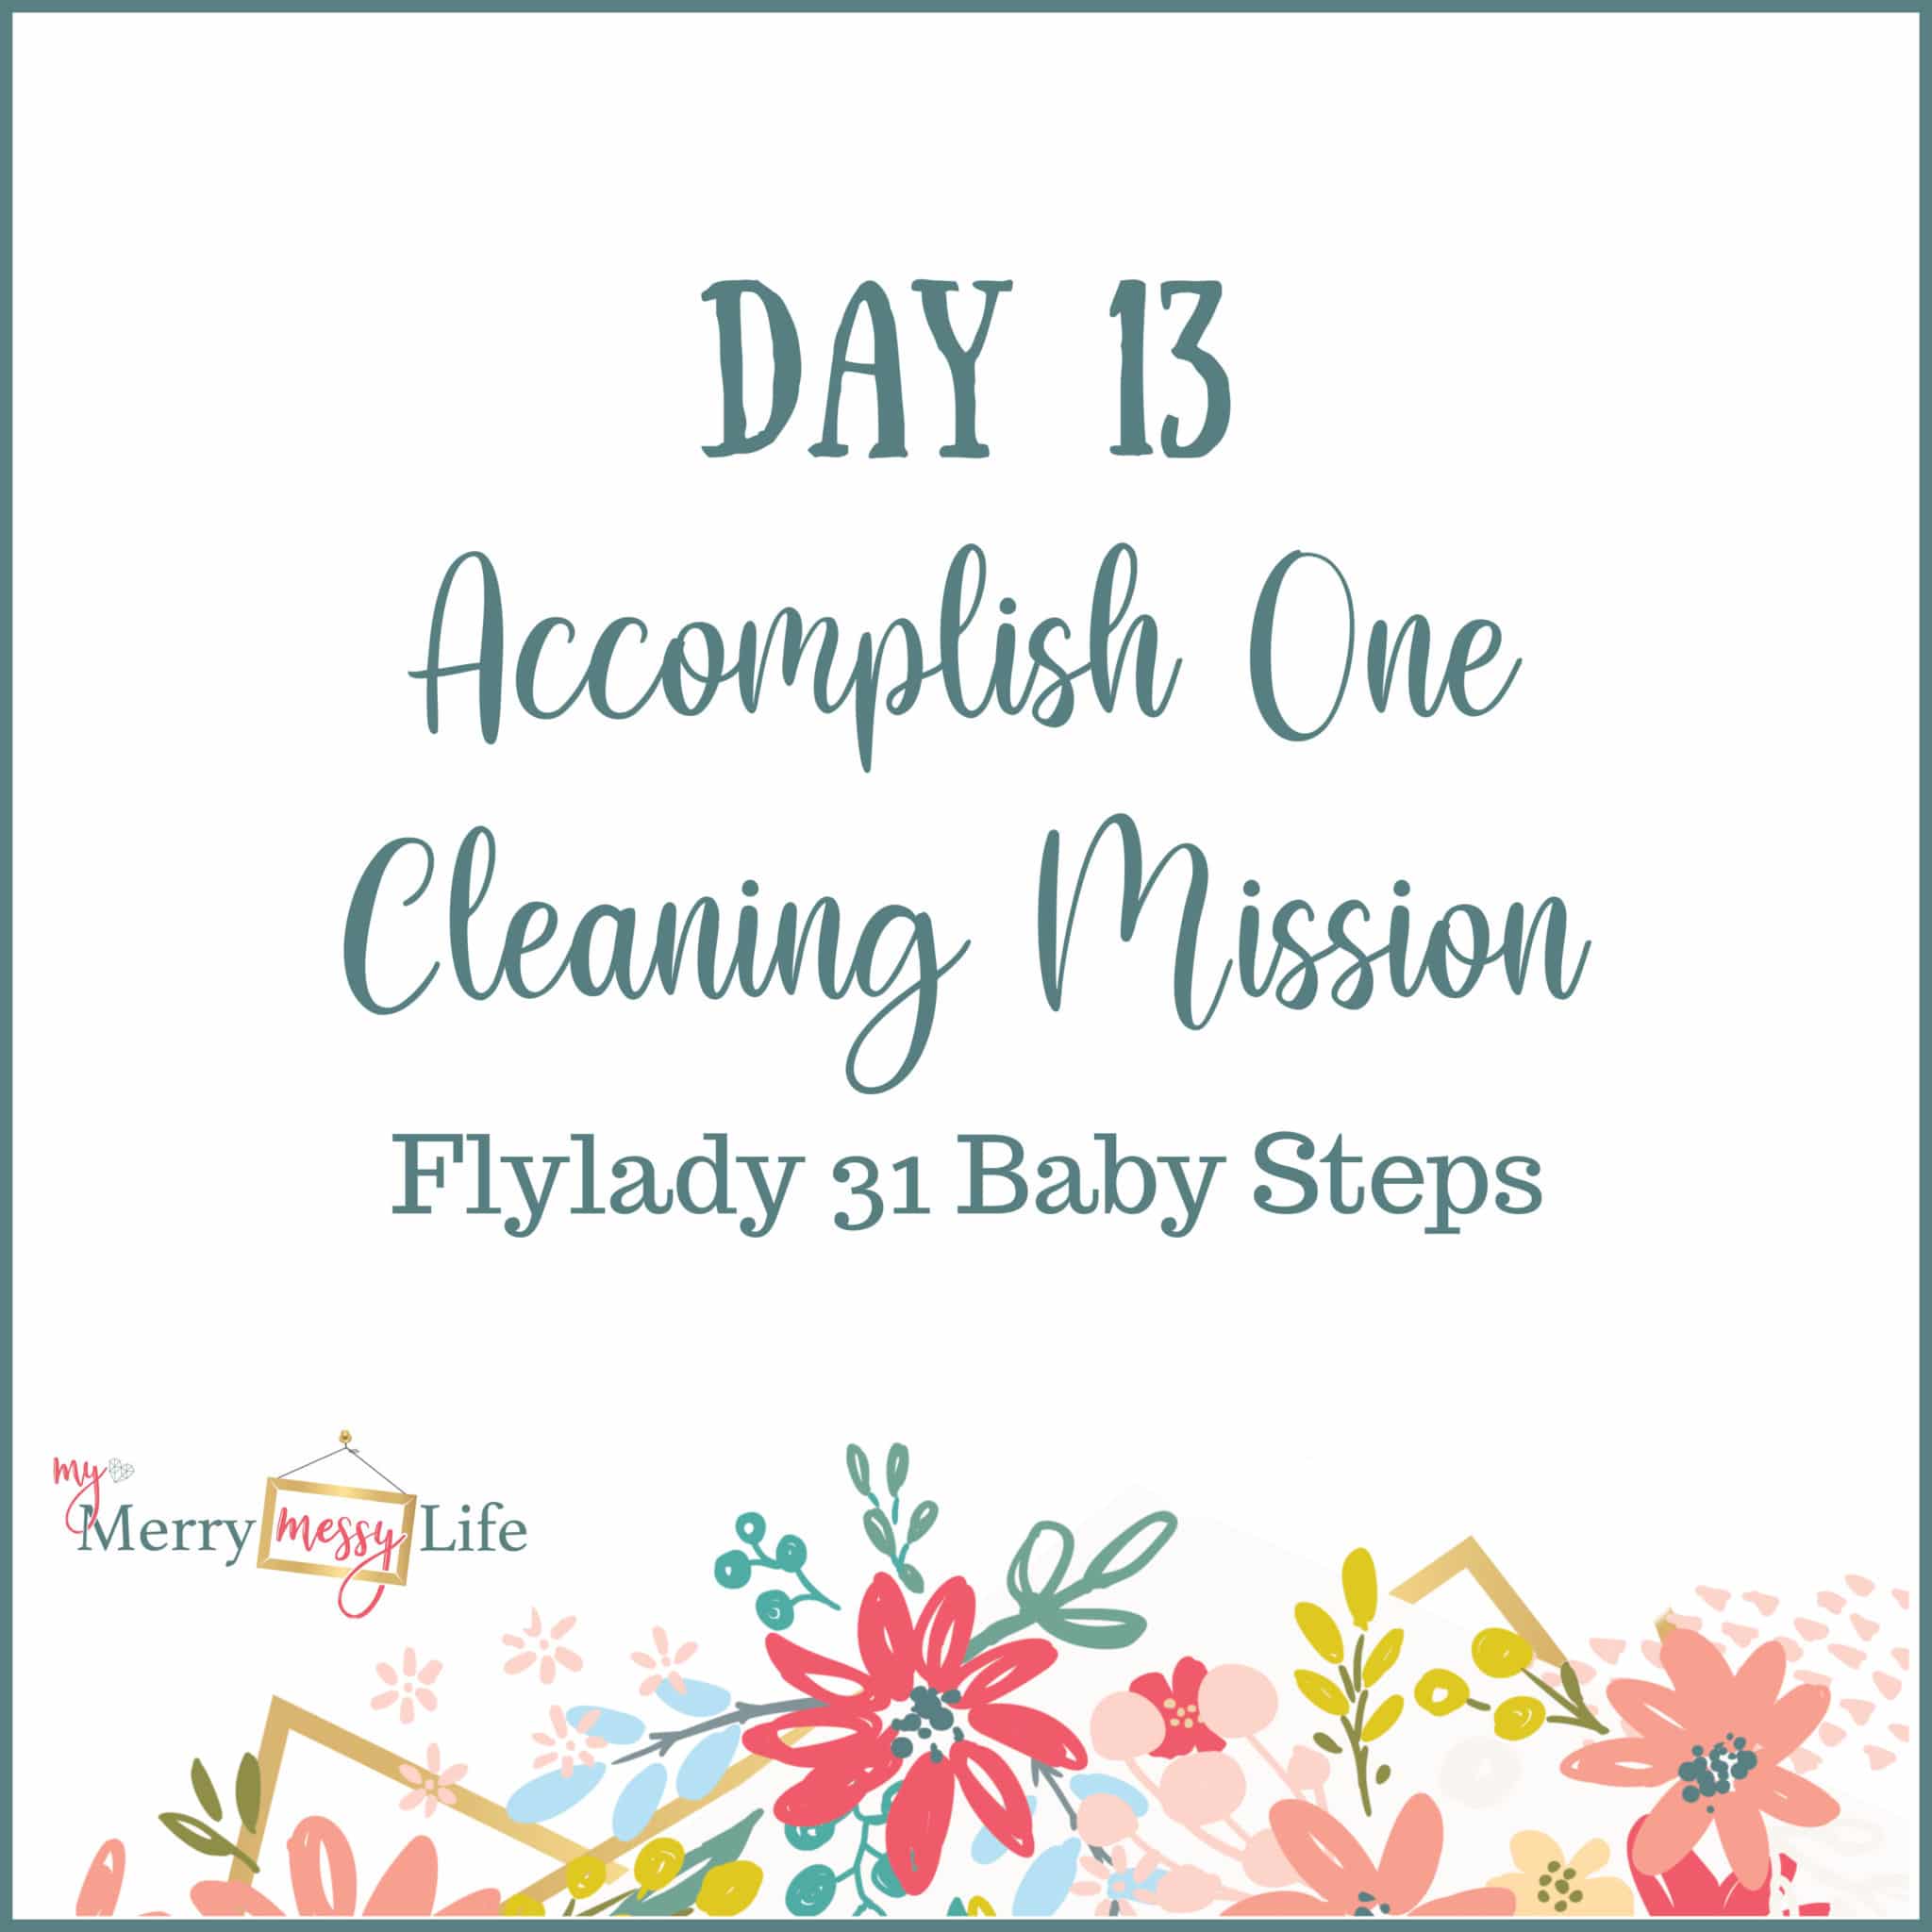 Flylady 31 Baby Steps - Day 13 - Accomplish One Cleaning Mission